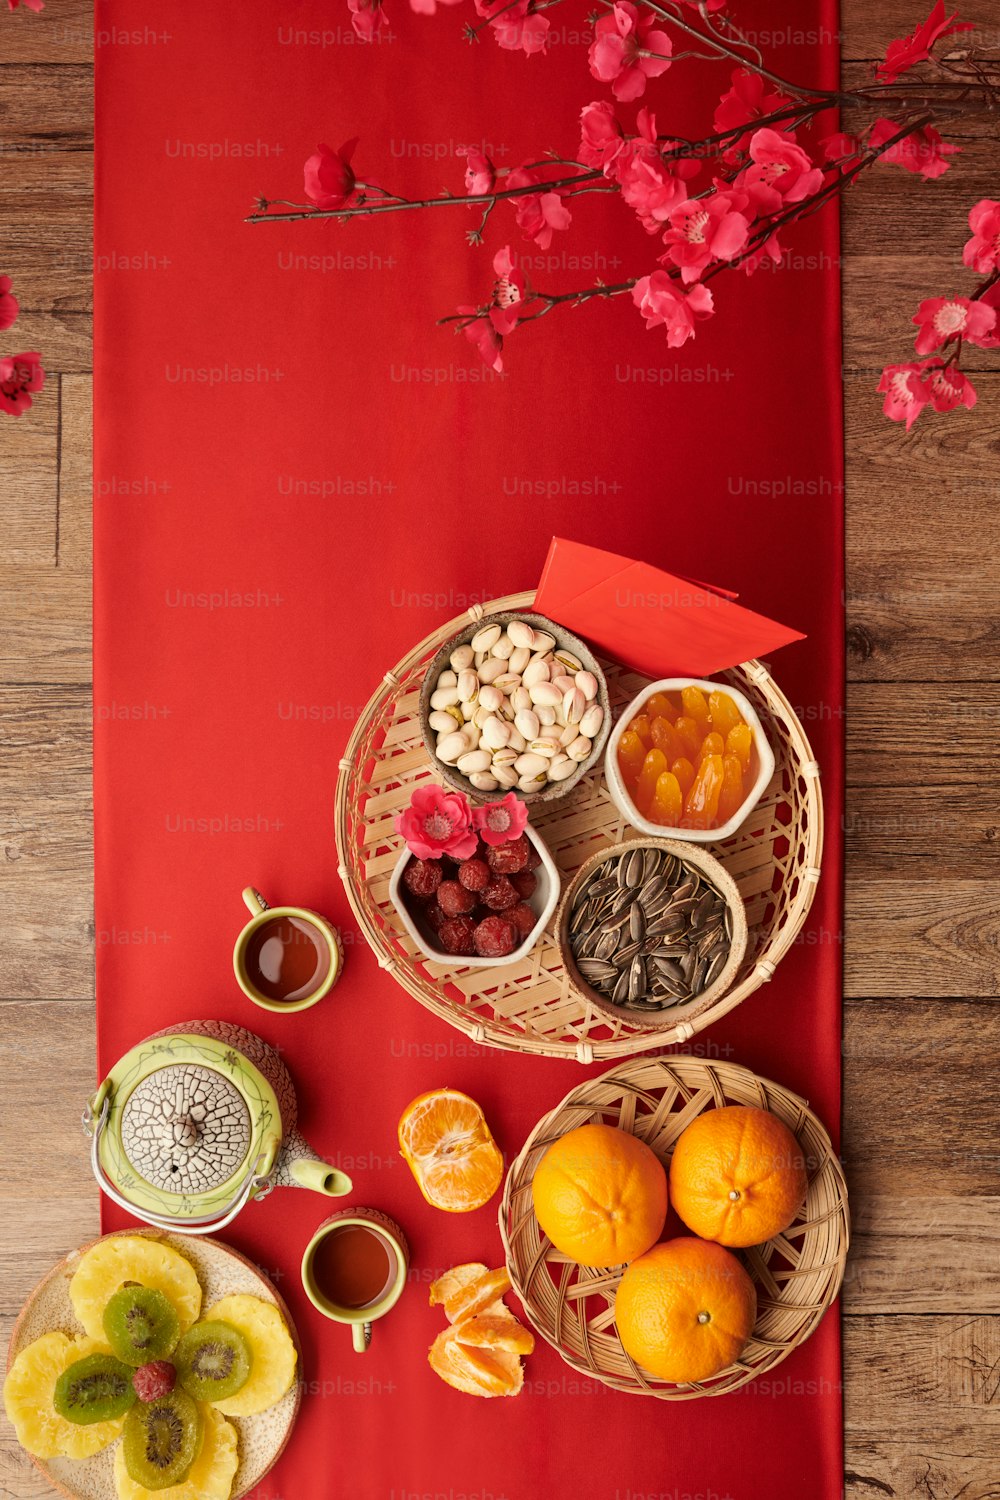 Red Envelope, FREE Stock Photo, Image, Picture: Chinese